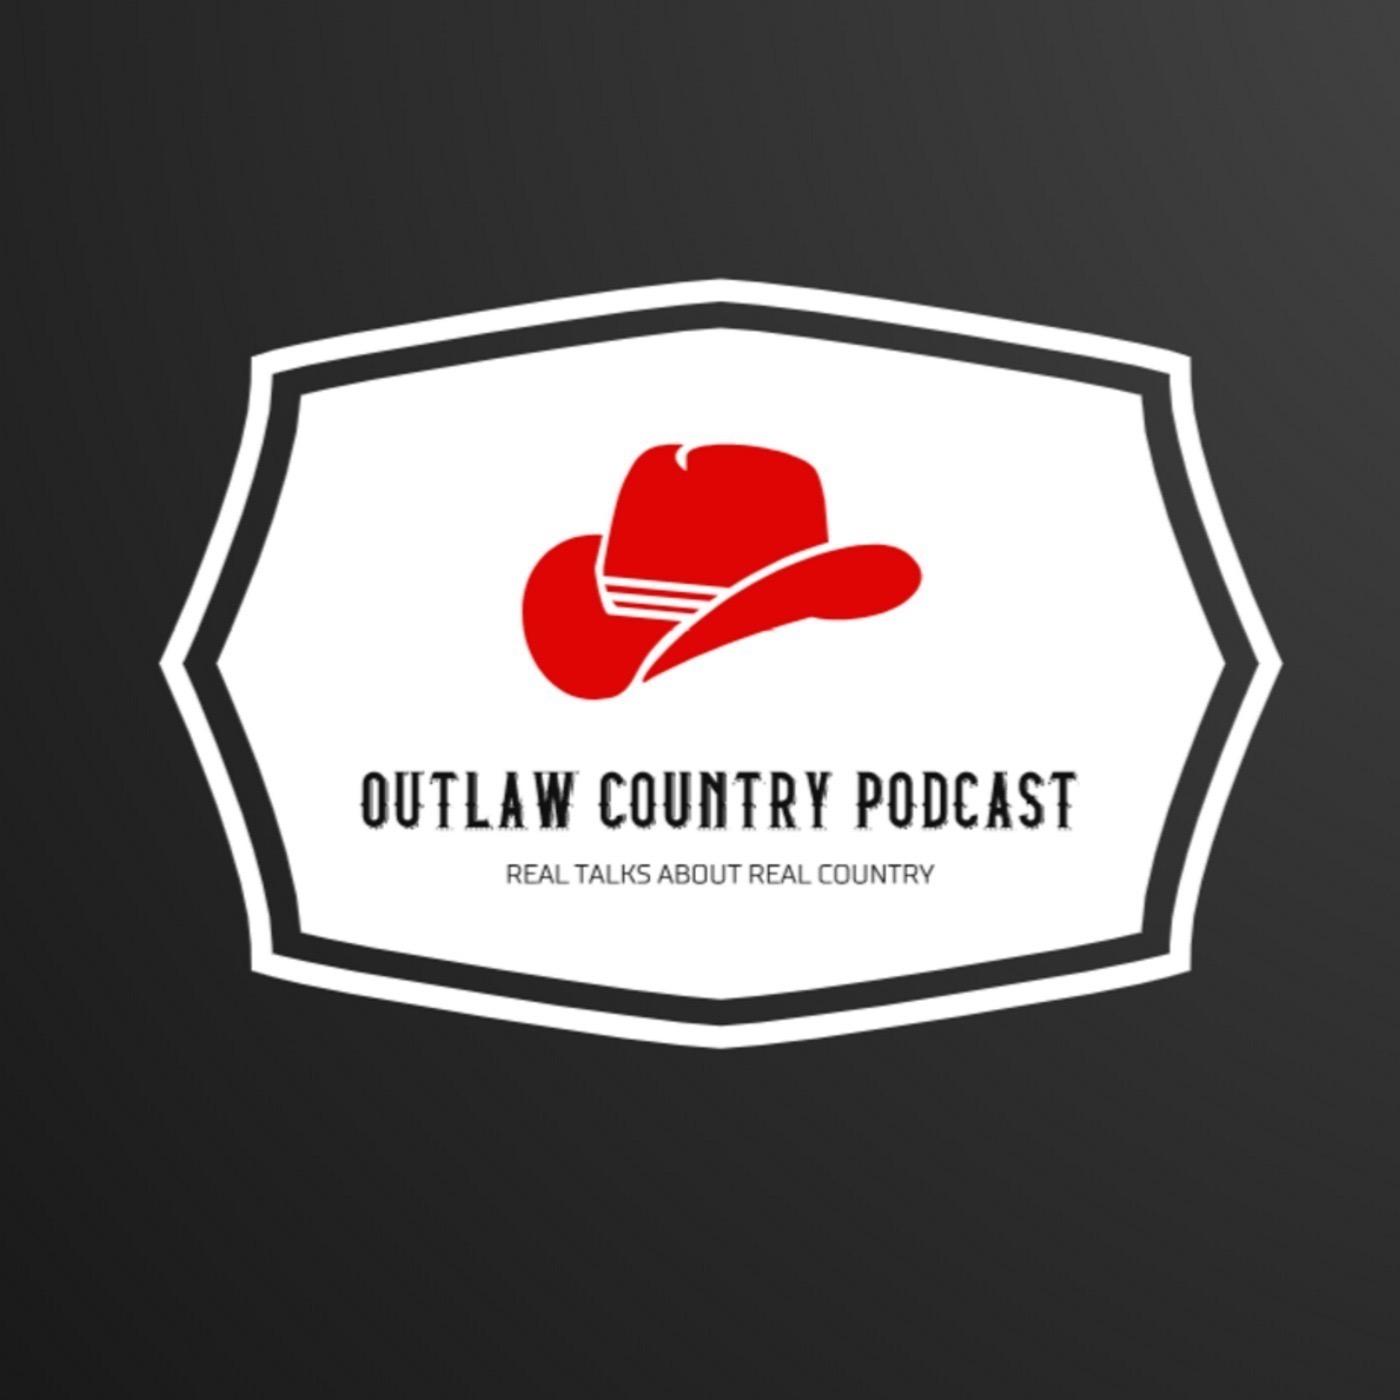 Outlaw Country Podcast